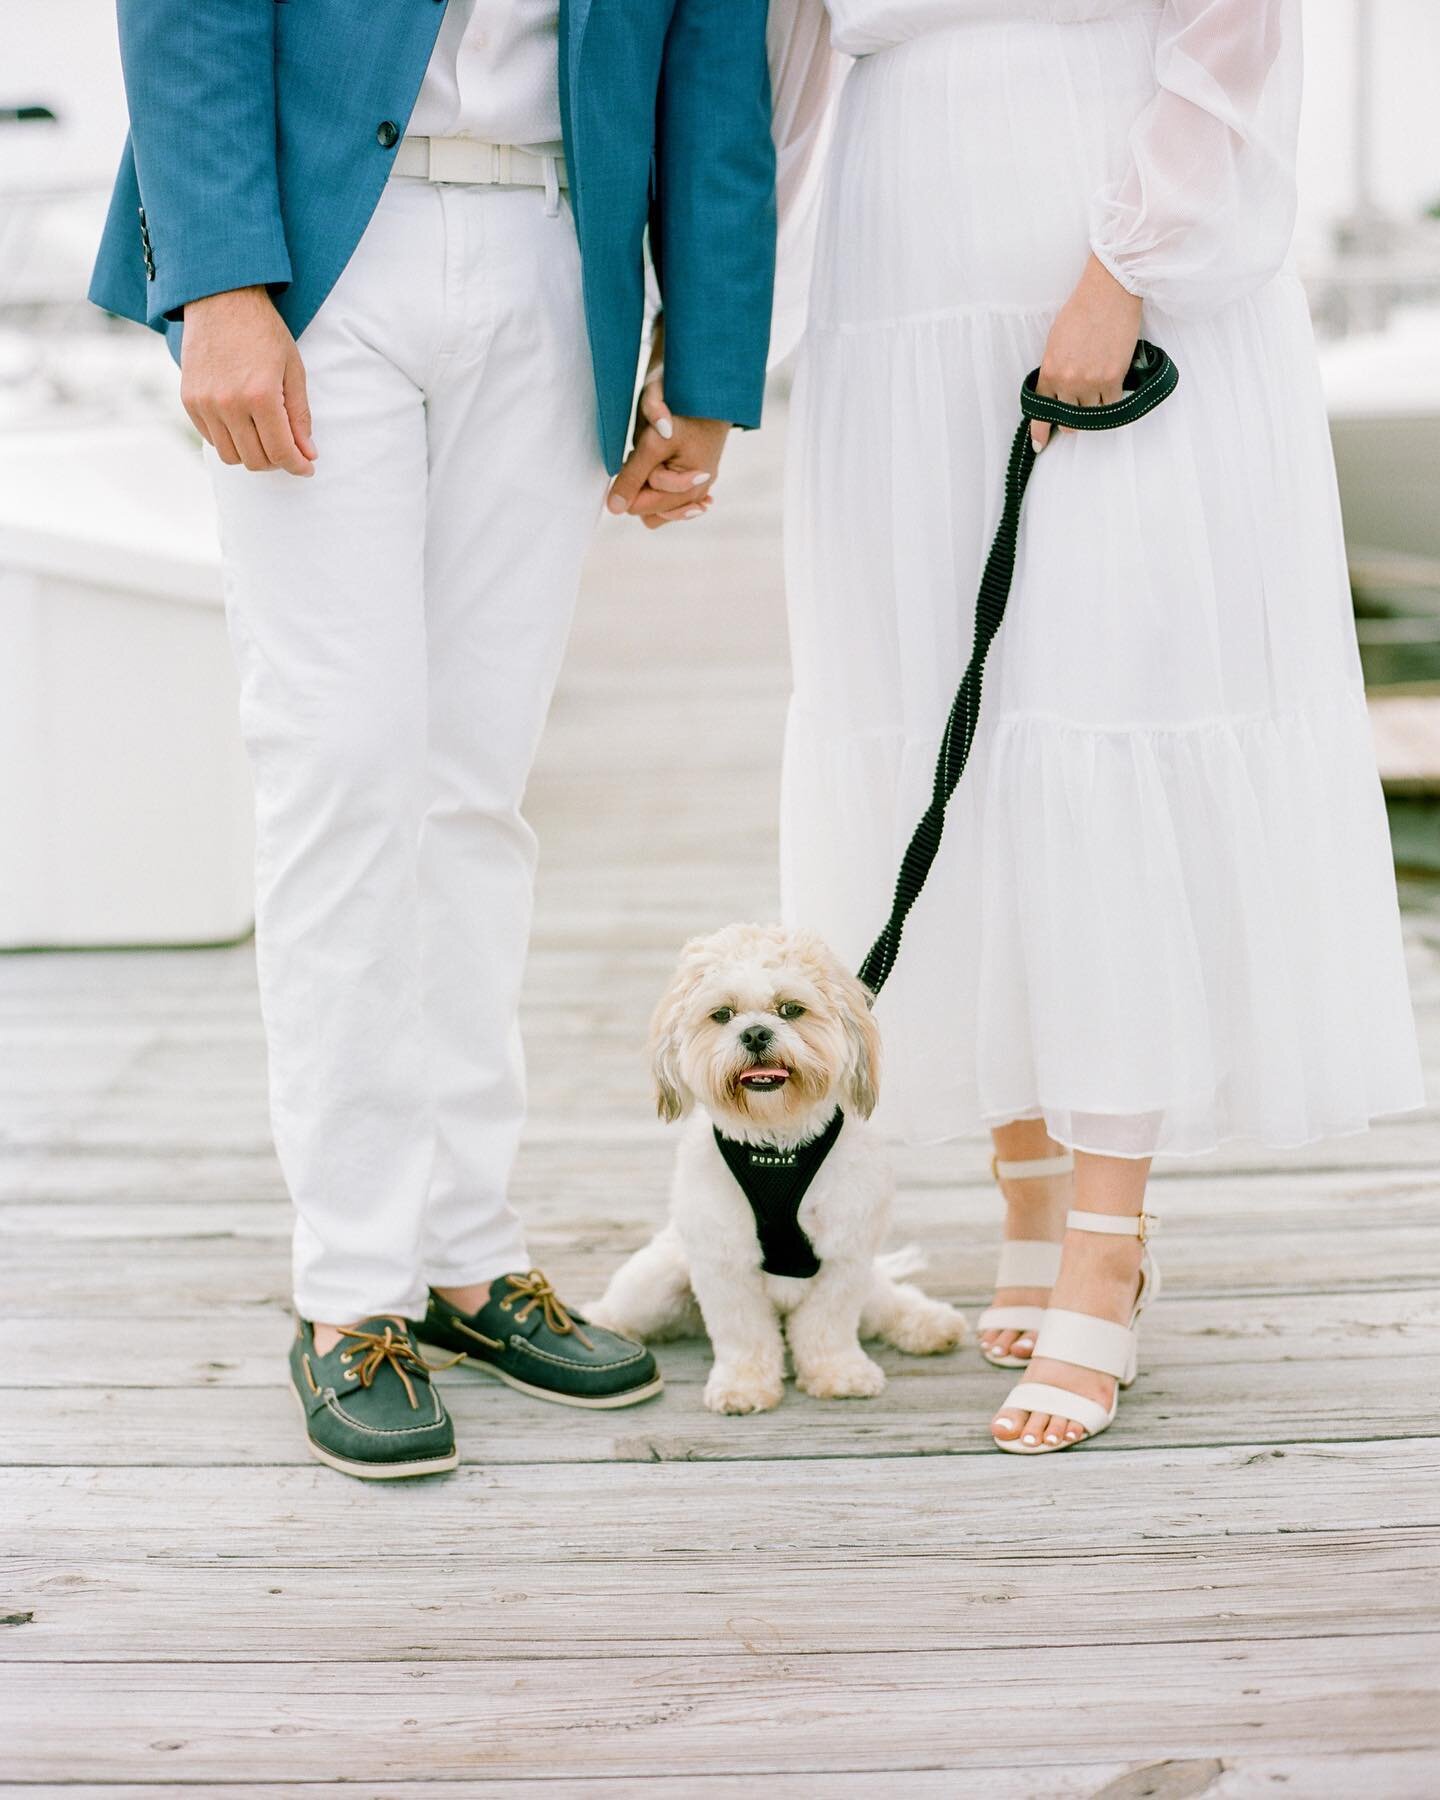 We are here to encourage you to involve your furry friends in all aspects of your wedding. 
⠀⠀⠀⠀⠀⠀⠀⠀⠀
Bring them to your engagement session. Get them comfortable with your photographer and listening to commands. If you want them to be a part of your 